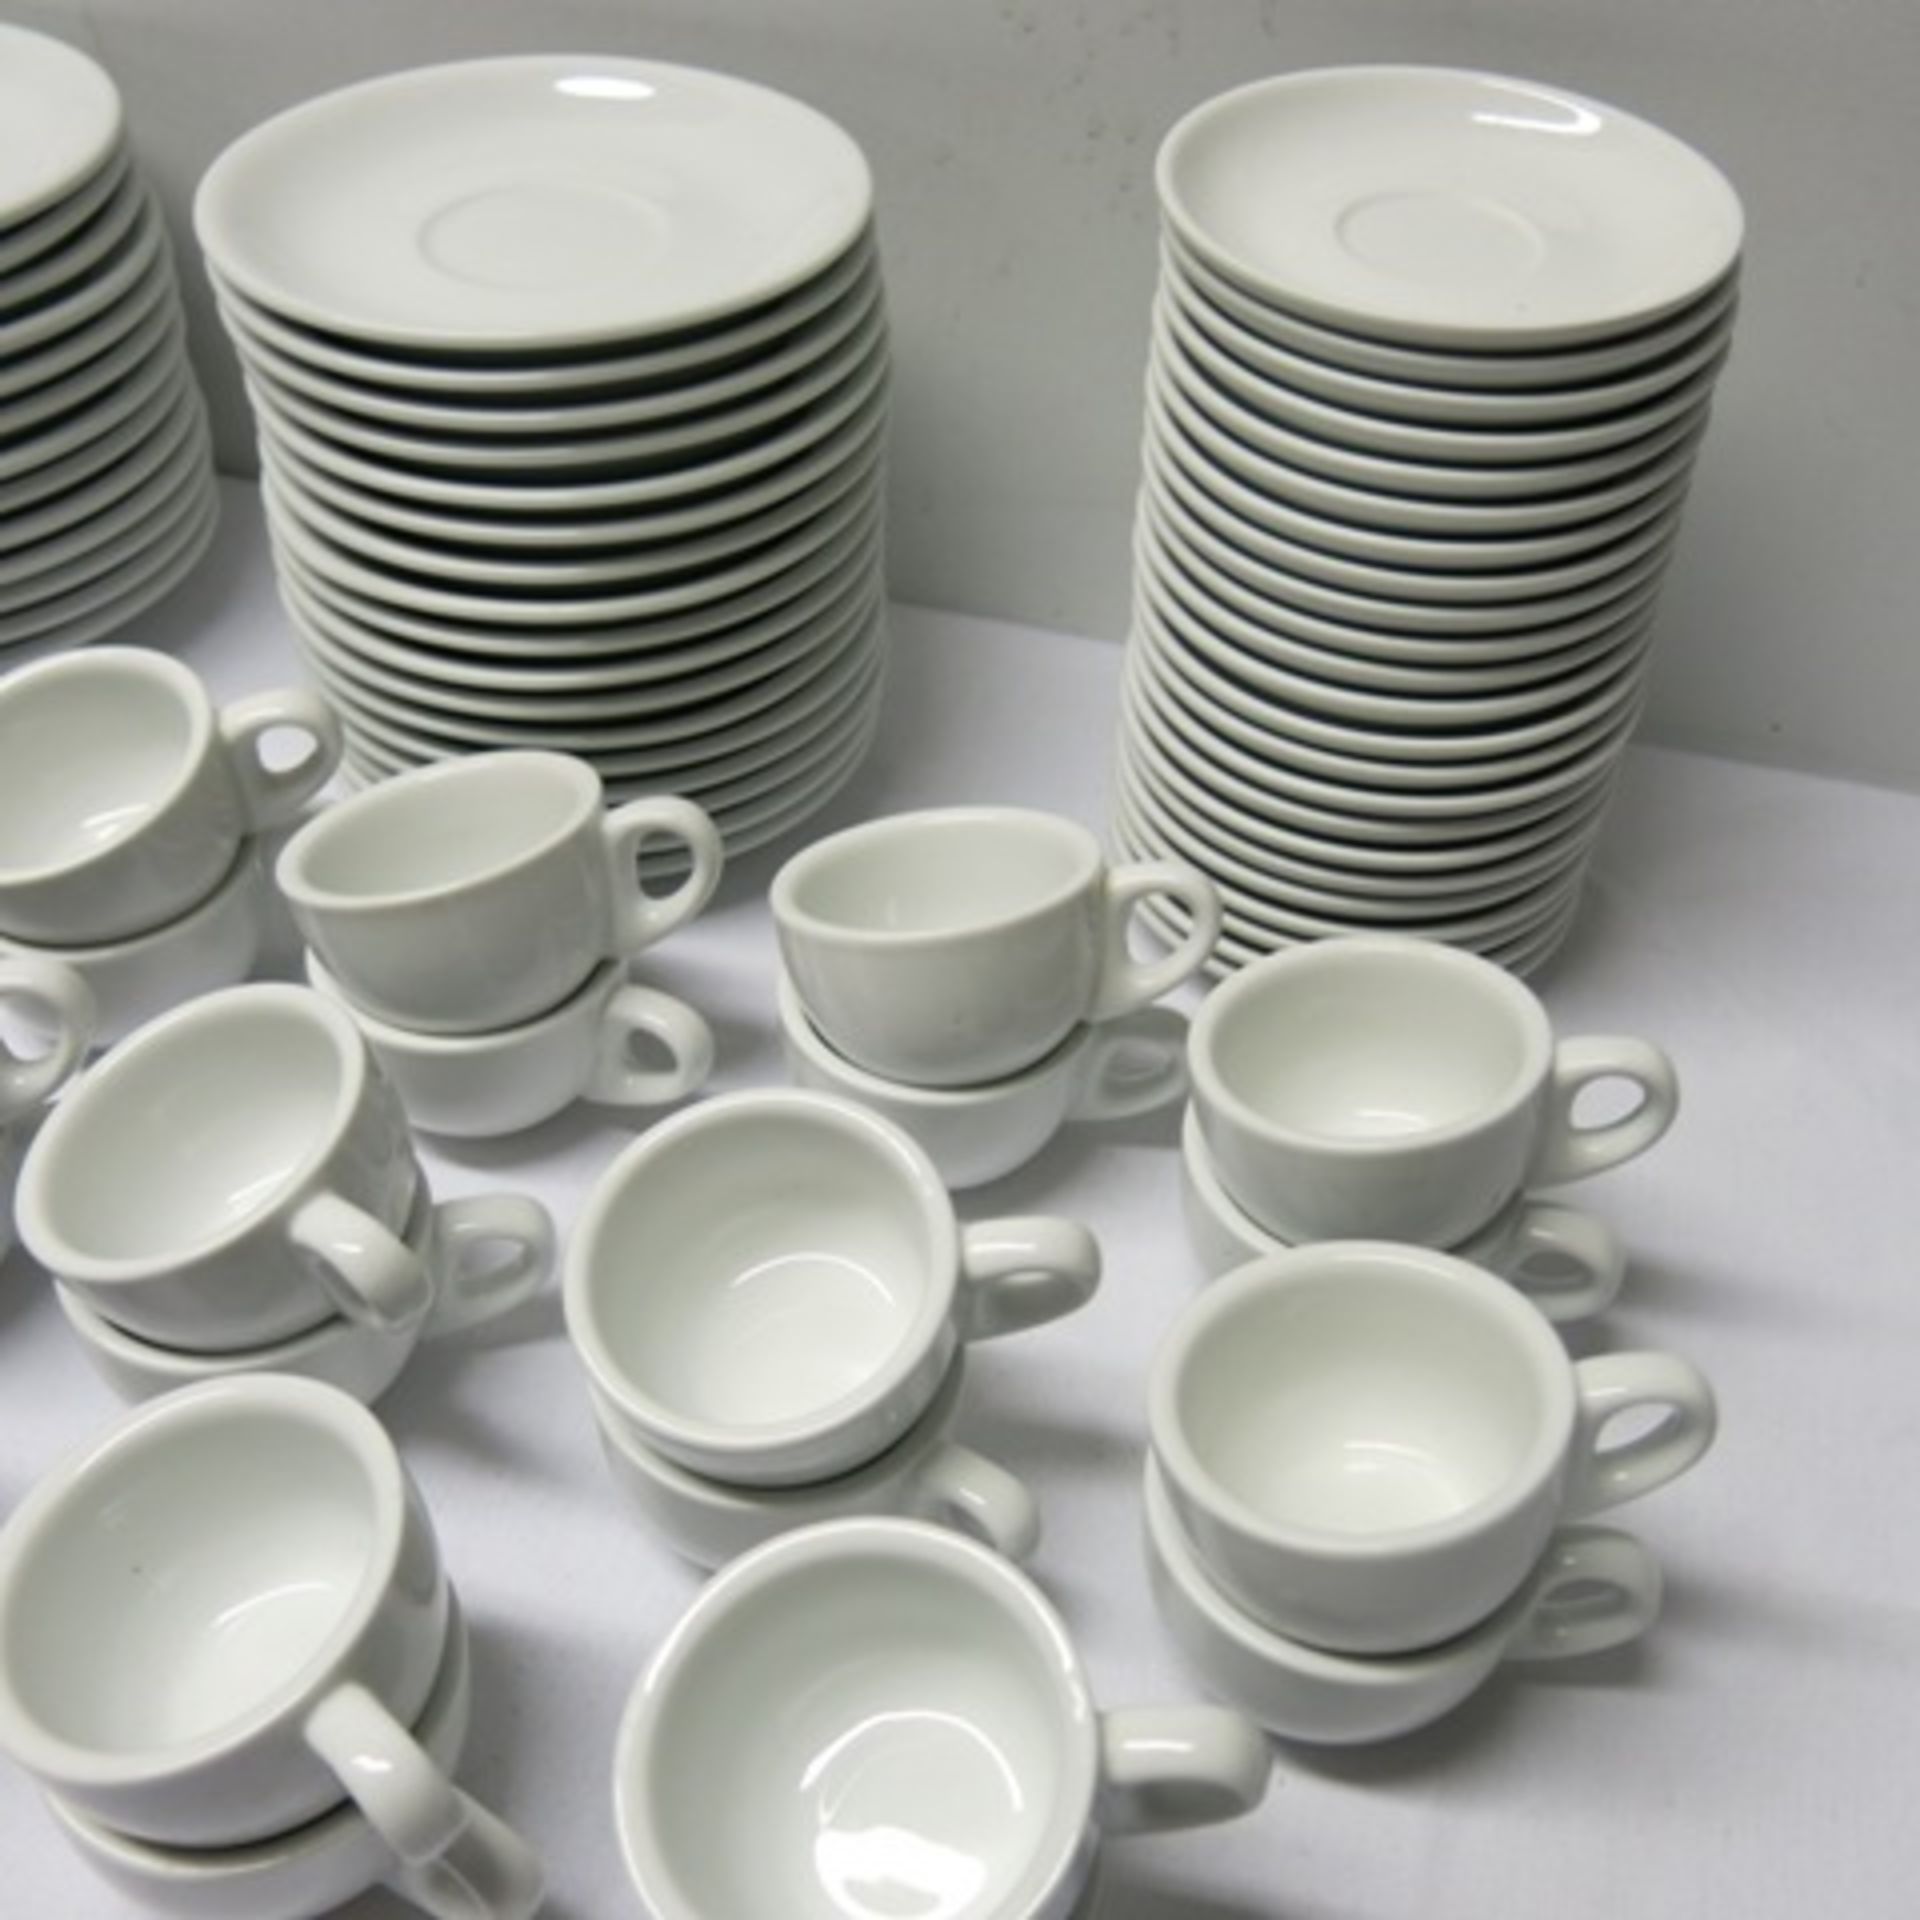 Large Quantity of Tea & Coffee Cup & Saucers with Teapots to Include: 7 x Forlife Teapots, 14 x - Image 4 of 10